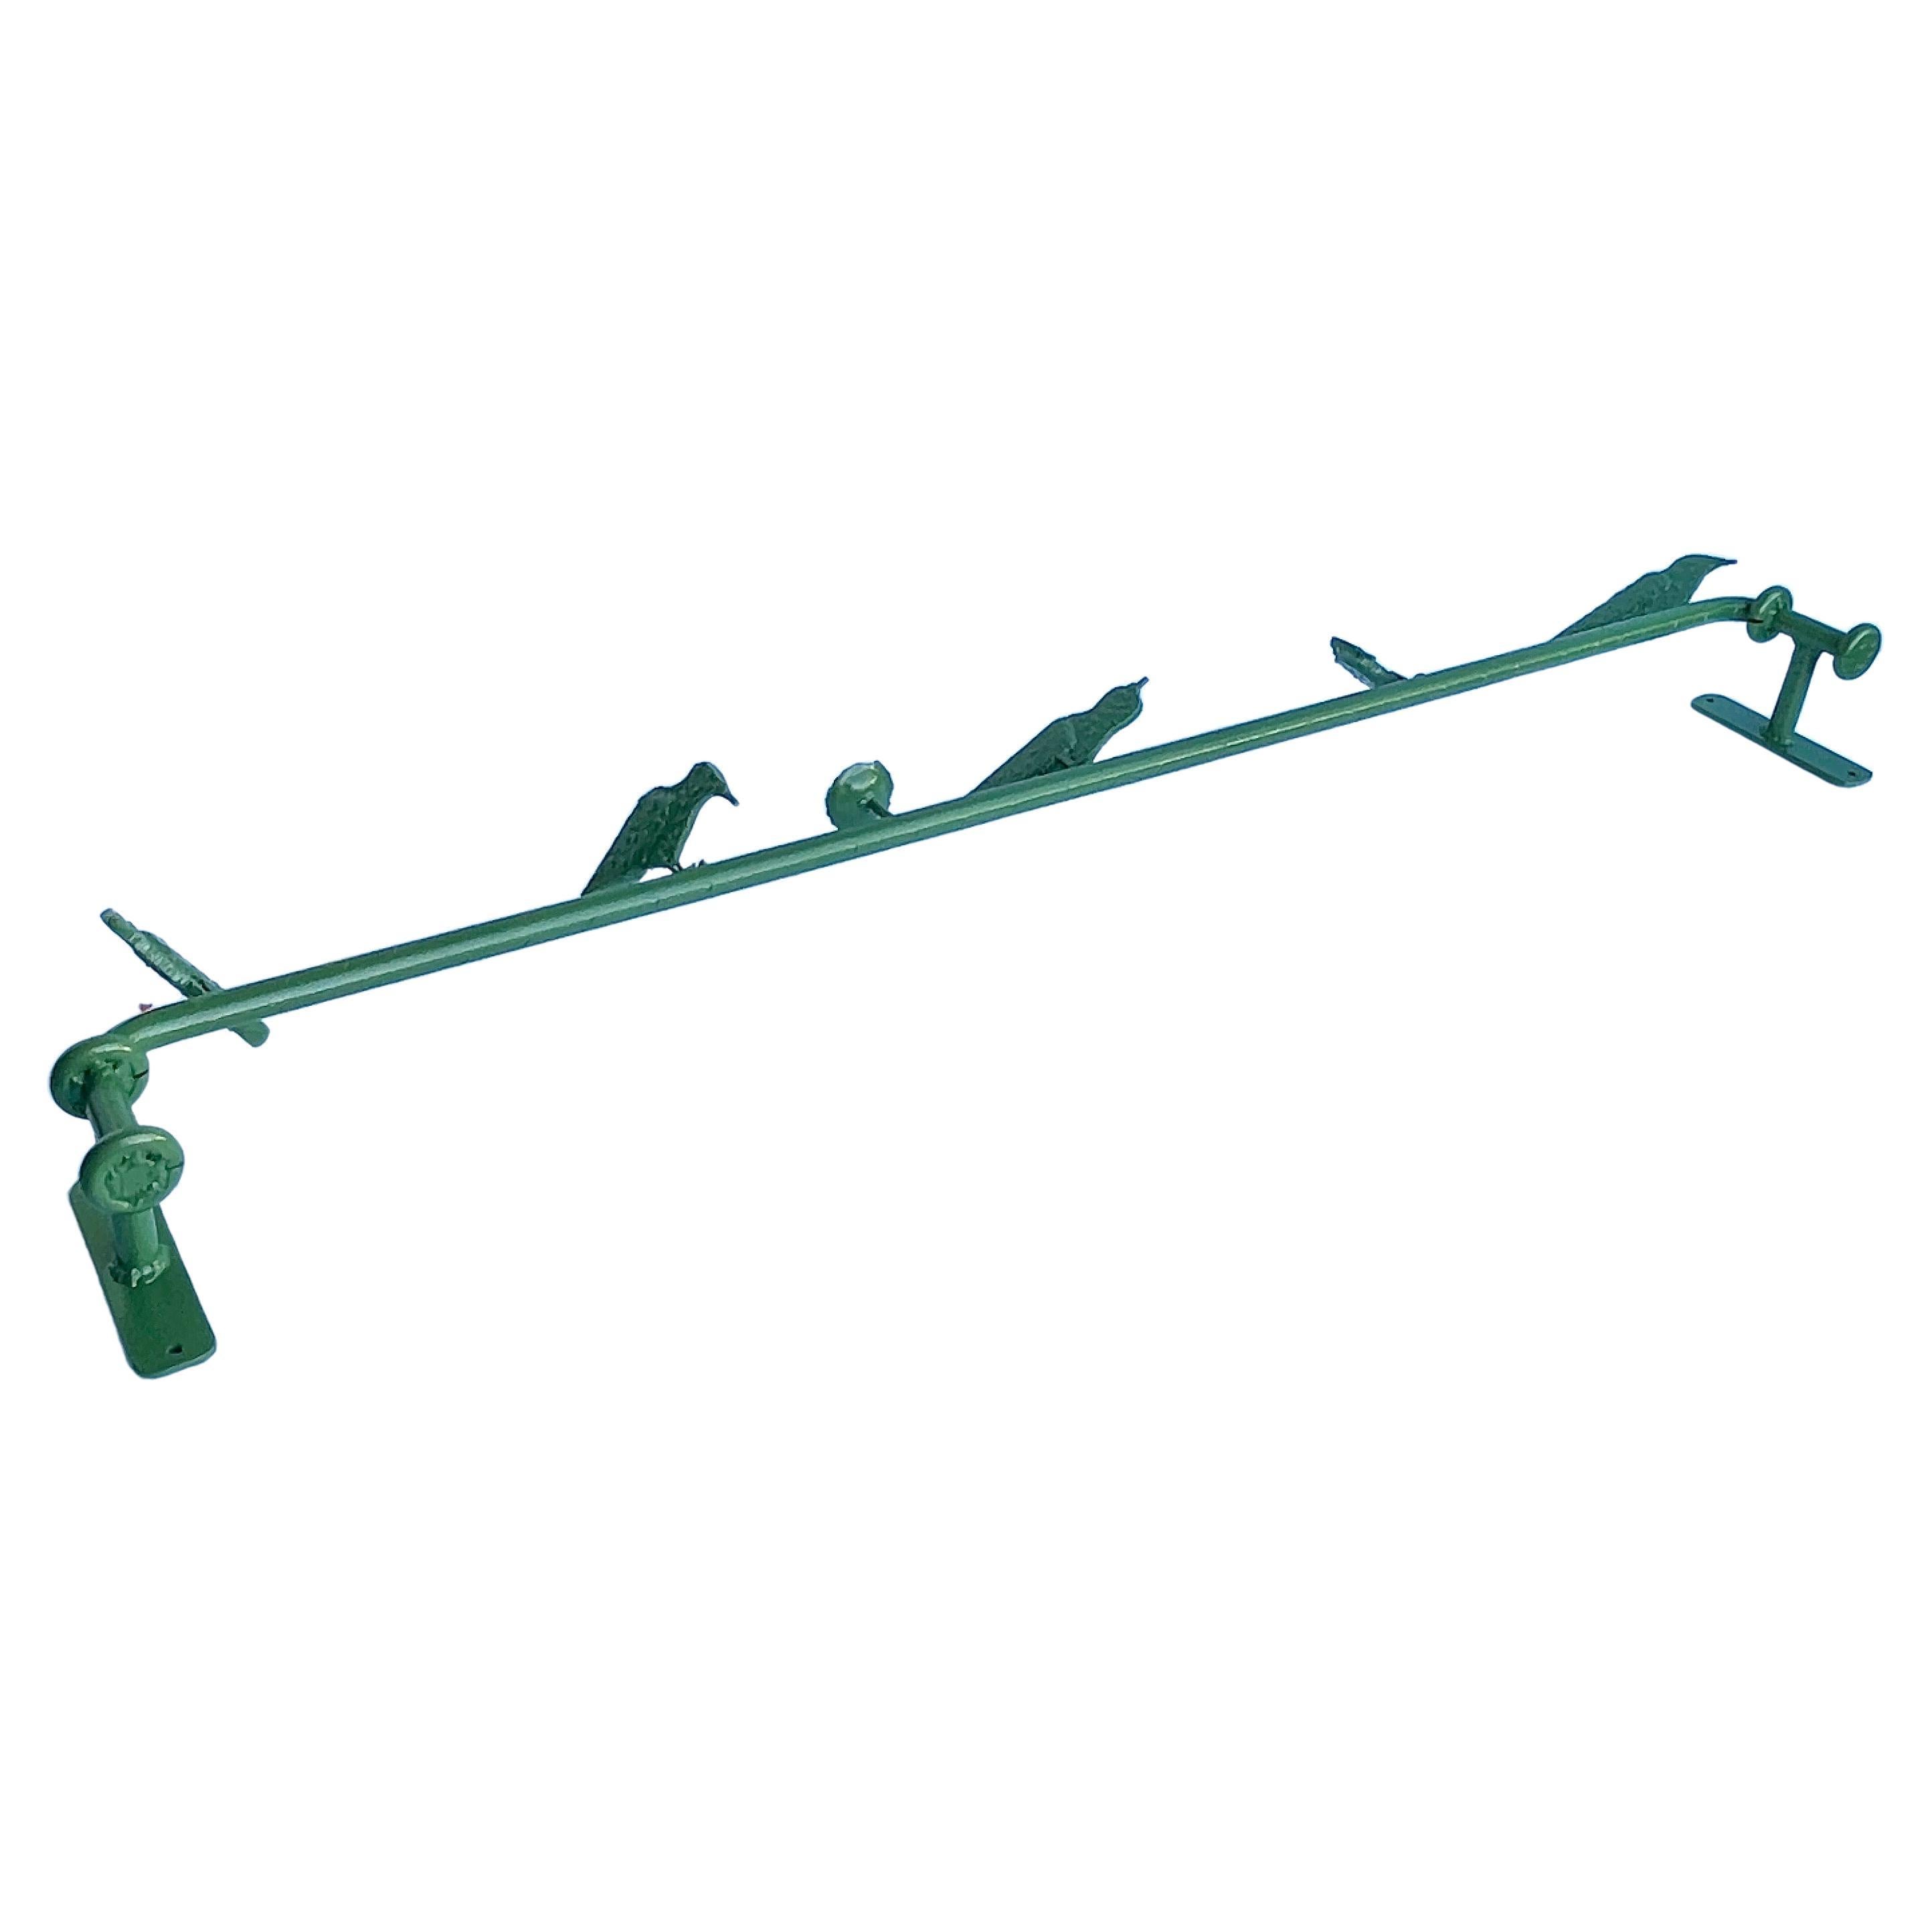 Hand-Crafted Iron Wall Bar Rod With Birds, Green Powder-Coated For Sale 4